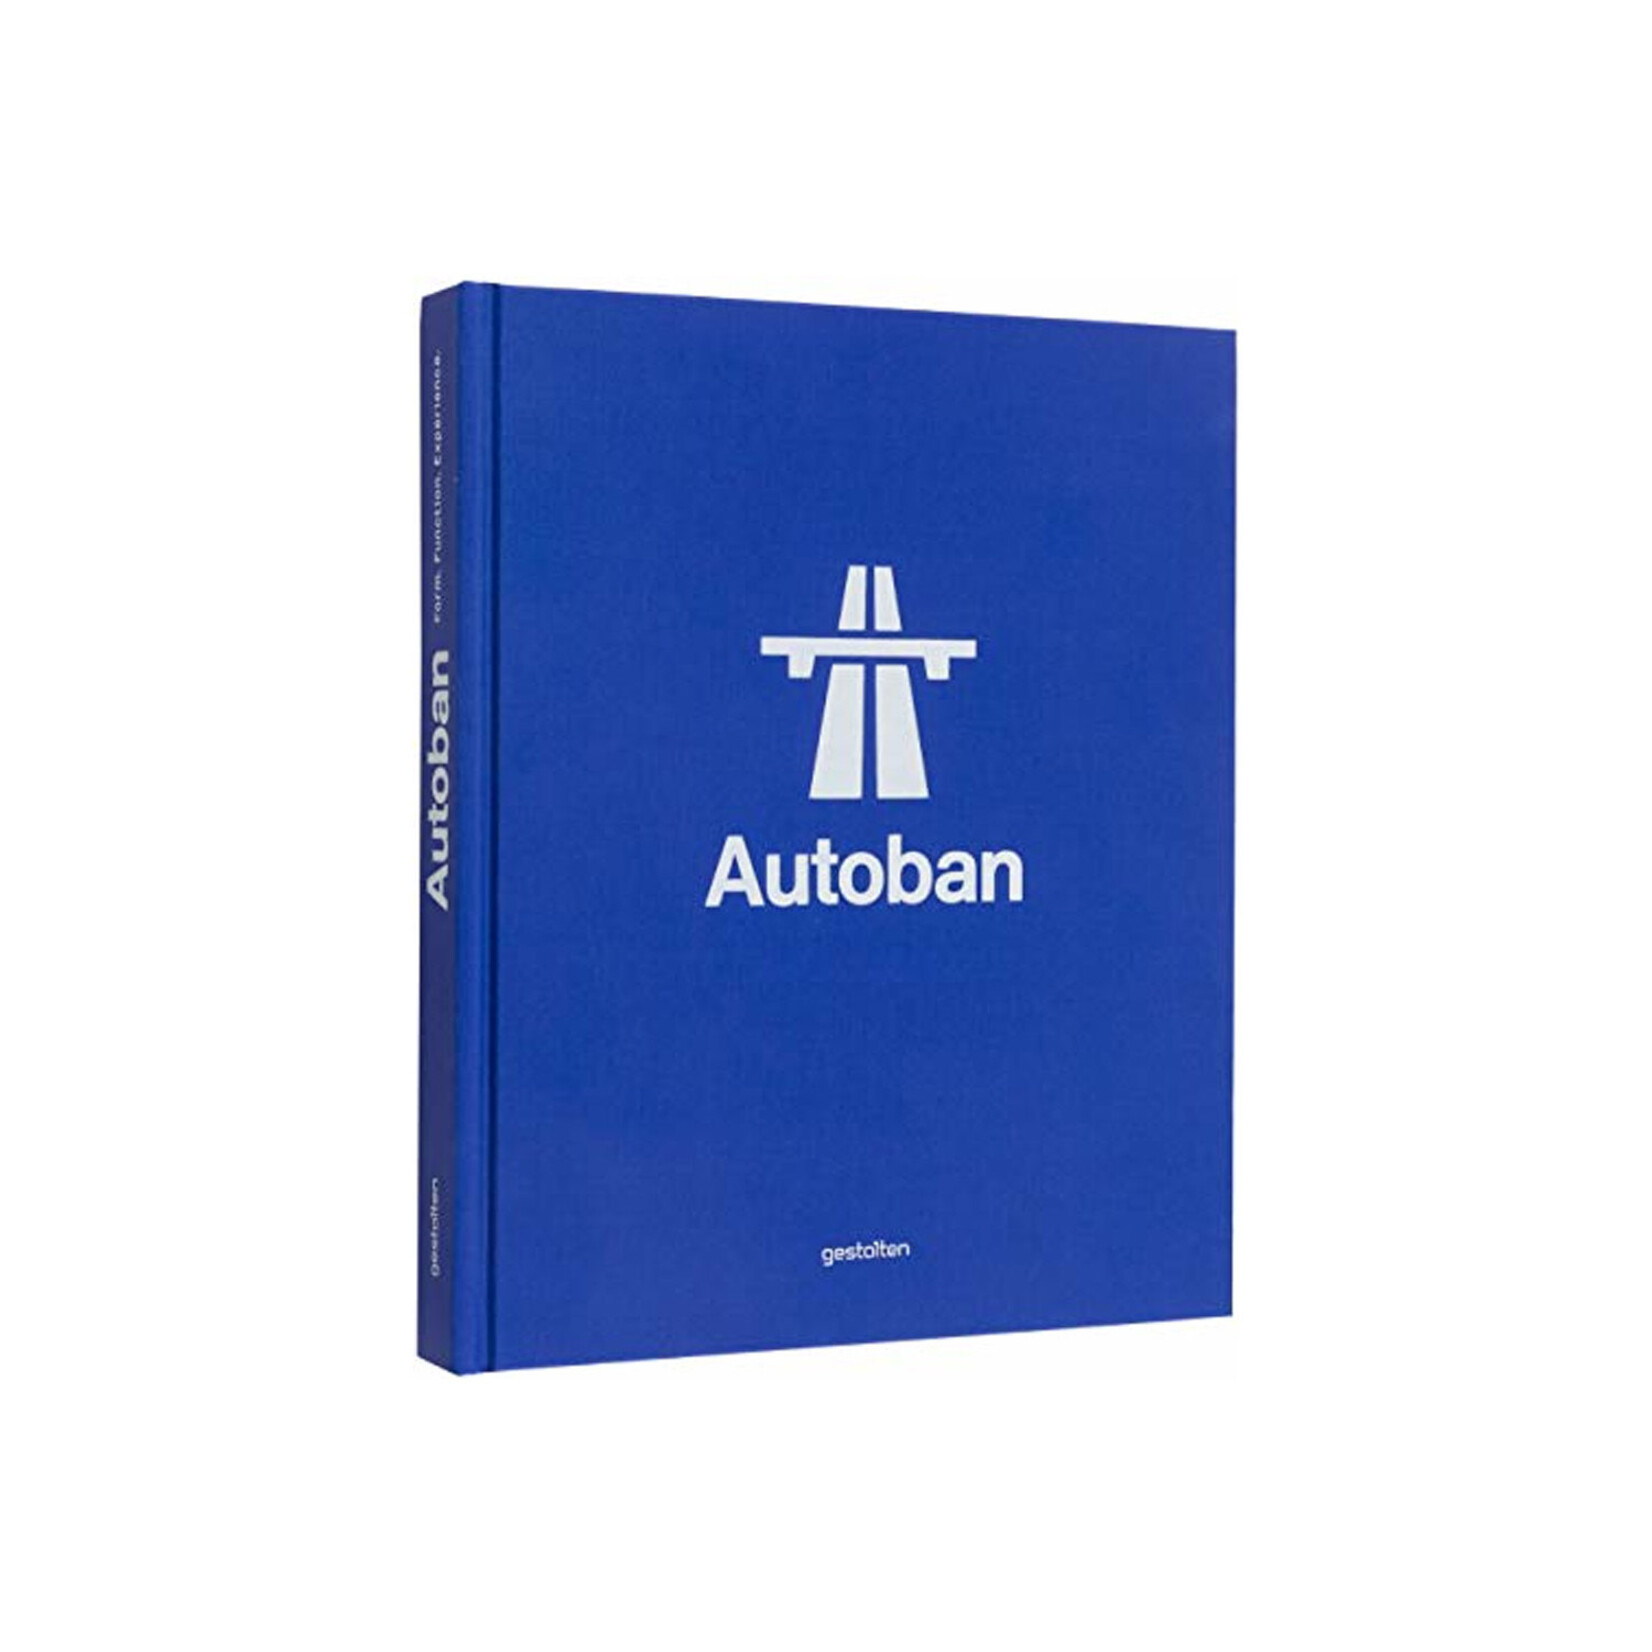 Autoban: Form, Function, Experience